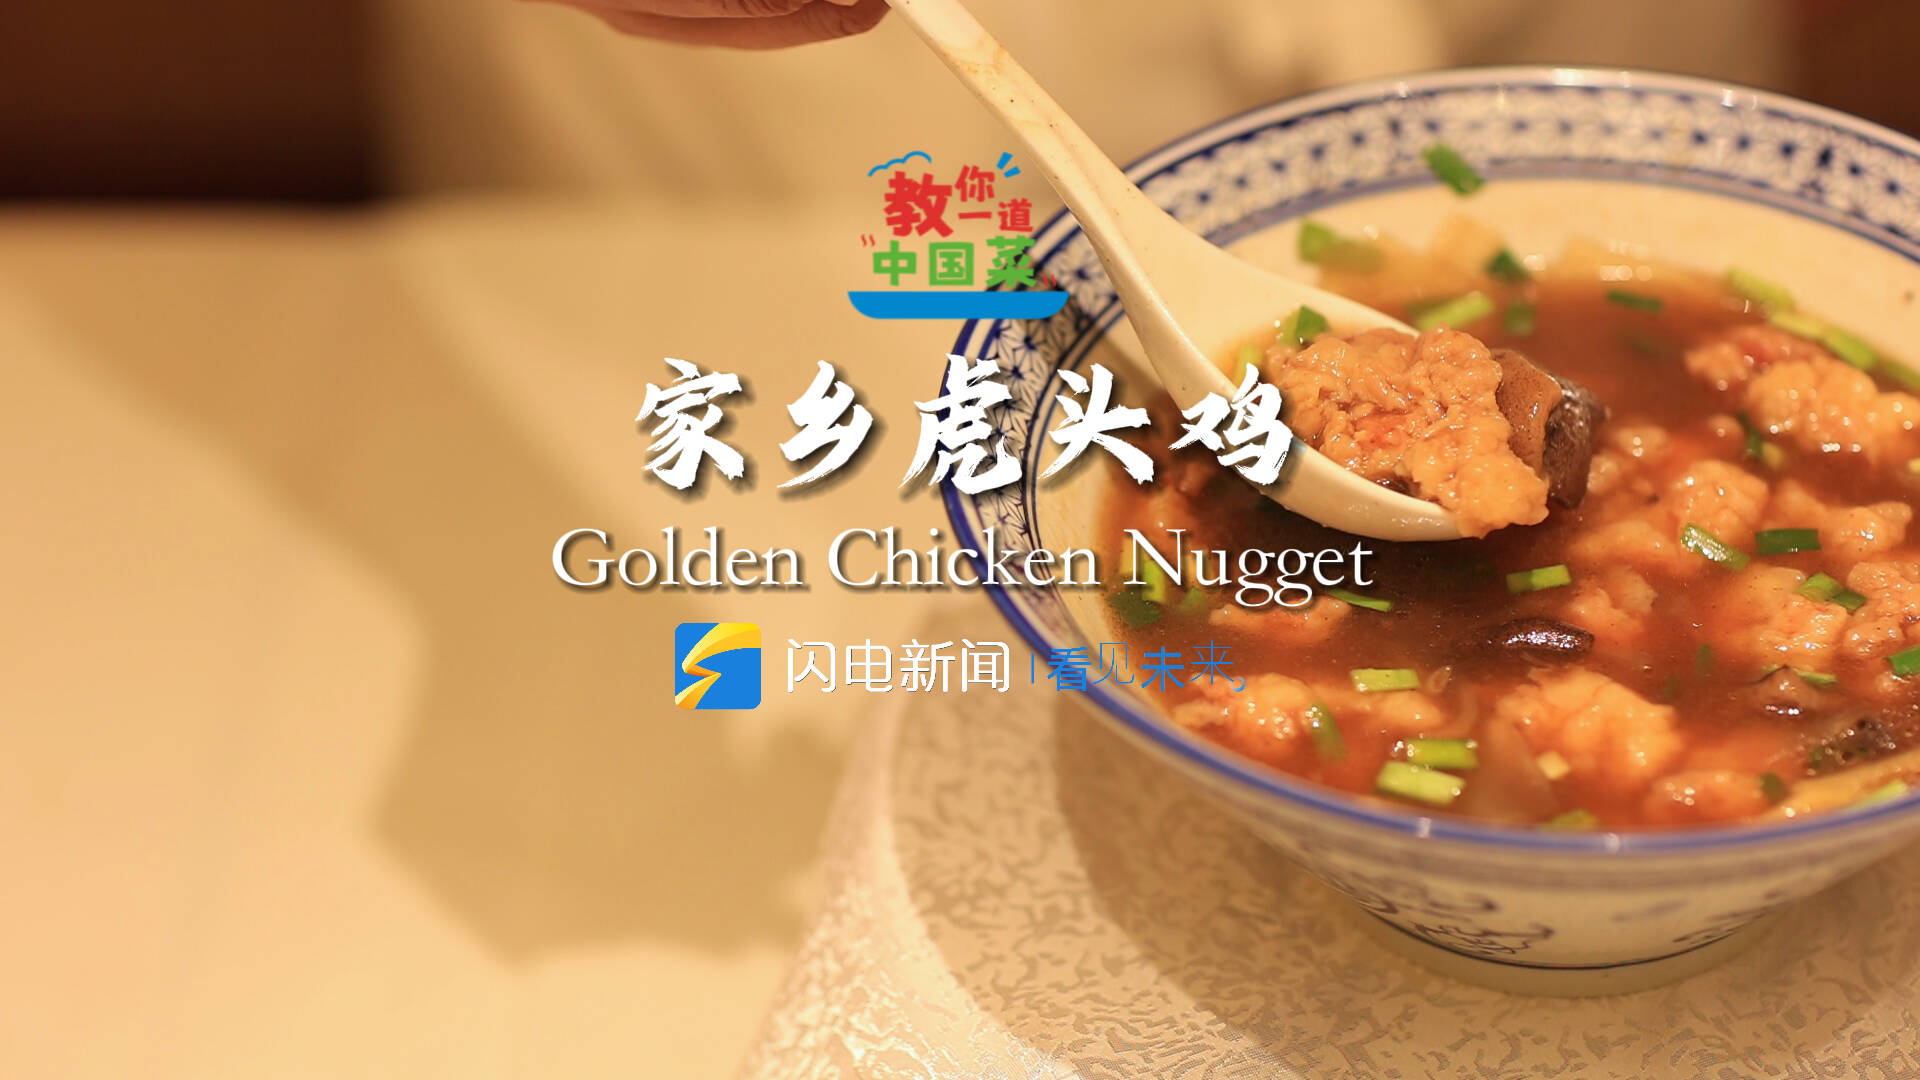 Let's Learn a Chinese Dish丨Golden Chicken Nugget